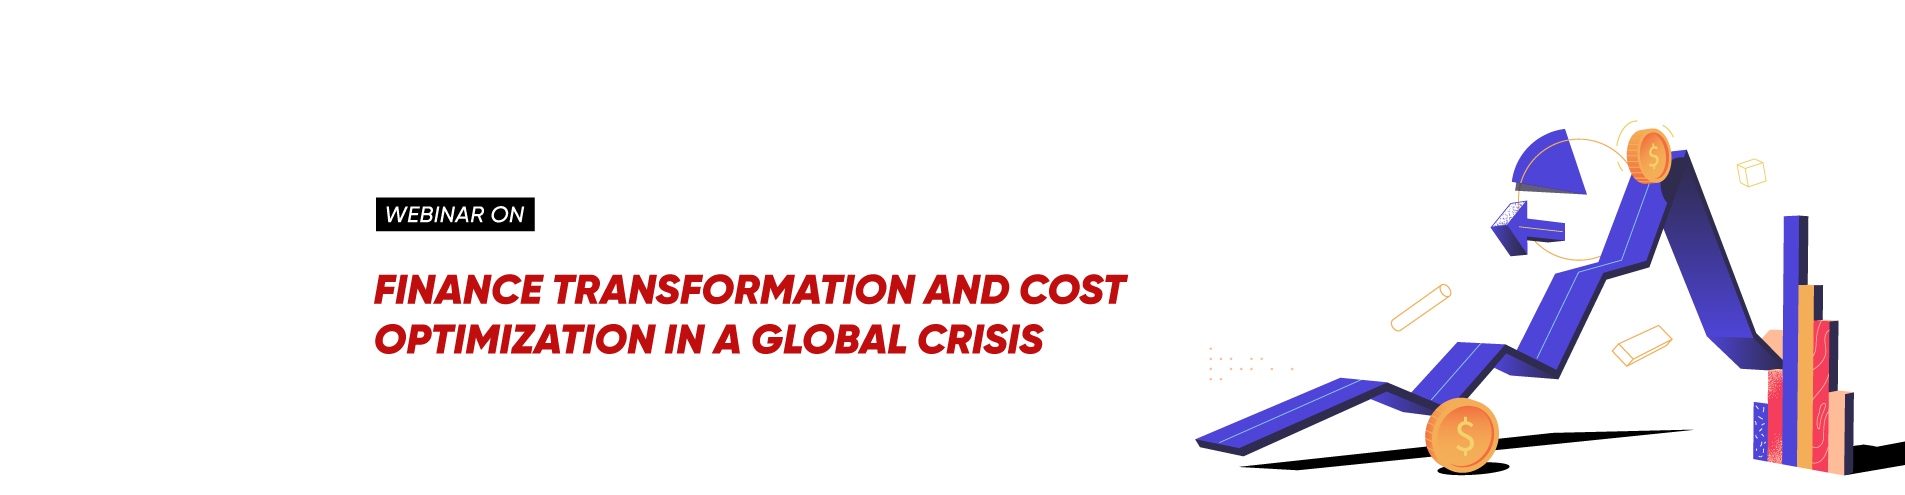 Landing-Page-Finance-Transformation-and-Cost-Optimization-in-a-Global-Crisis